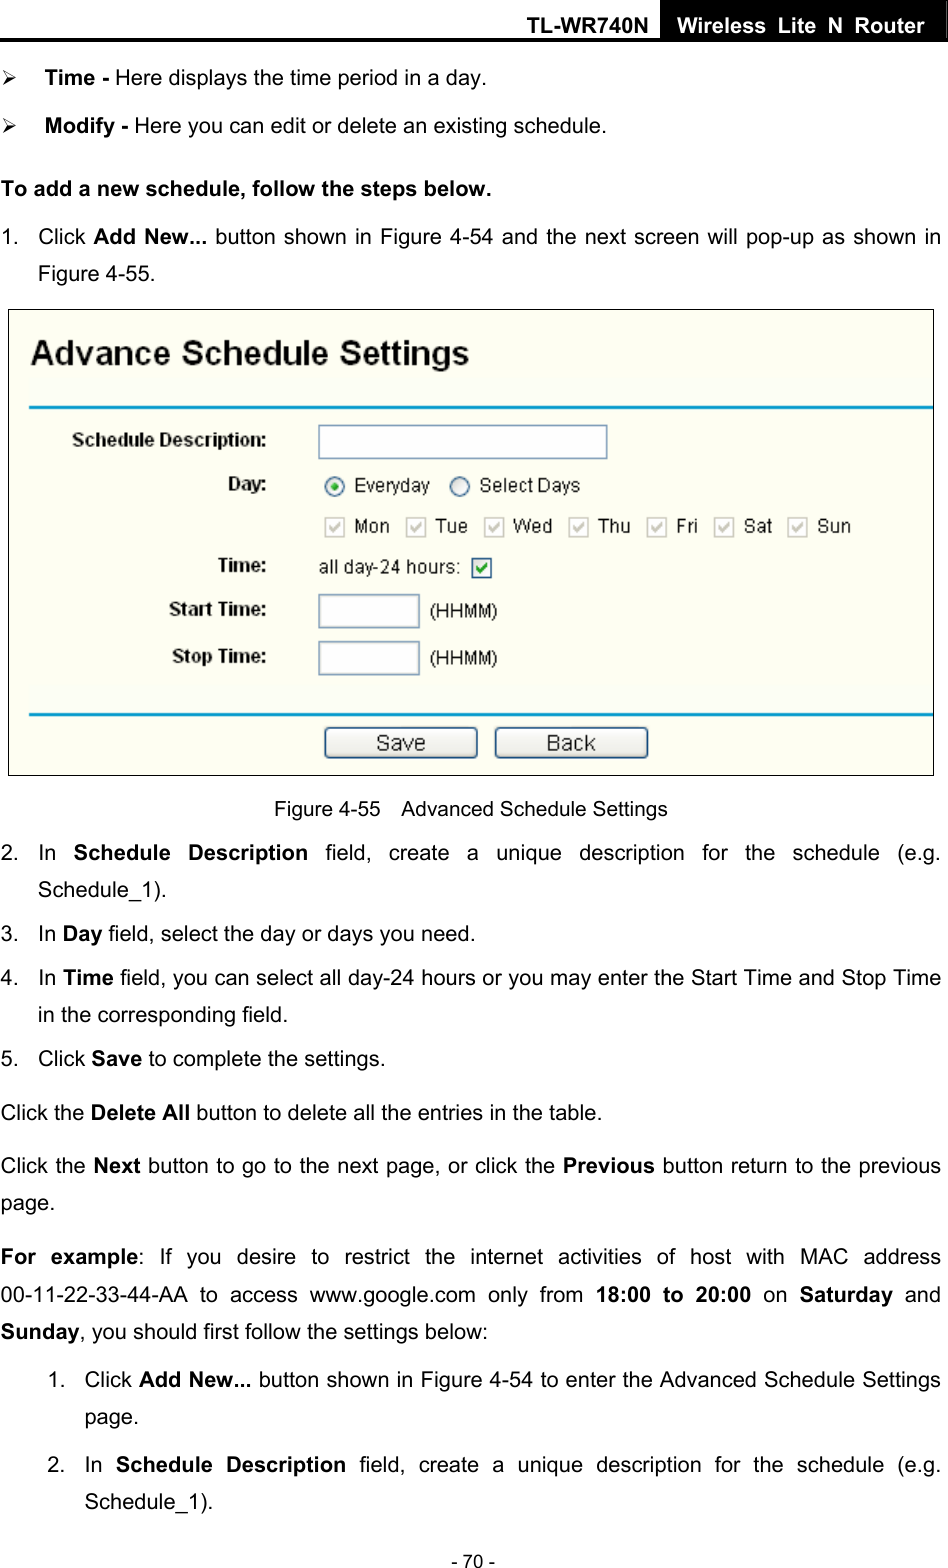 TL-WR740N Wireless Lite N Router  - 70 - ¾ Time - Here displays the time period in a day.   ¾ Modify - Here you can edit or delete an existing schedule.   To add a new schedule, follow the steps below. 1. Click Add New... button shown in Figure 4-54 and the next screen will pop-up as shown in Figure 4-55.    Figure 4-55    Advanced Schedule Settings 2. In Schedule Description field, create a unique description for the schedule (e.g. Schedule_1).  3. In Day field, select the day or days you need.   4. In Time field, you can select all day-24 hours or you may enter the Start Time and Stop Time in the corresponding field. 5. Click Save to complete the settings.   Click the Delete All button to delete all the entries in the table. Click the Next button to go to the next page, or click the Previous button return to the previous page. For example: If you desire to restrict the internet activities of host with MAC address 00-11-22-33-44-AA to access www.google.com only from 18:00 to 20:00 on Saturday  and Sunday, you should first follow the settings below: 1. Click Add New... button shown in Figure 4-54 to enter the Advanced Schedule Settings page. 2. In Schedule Description field, create a unique description for the schedule (e.g. Schedule_1).  